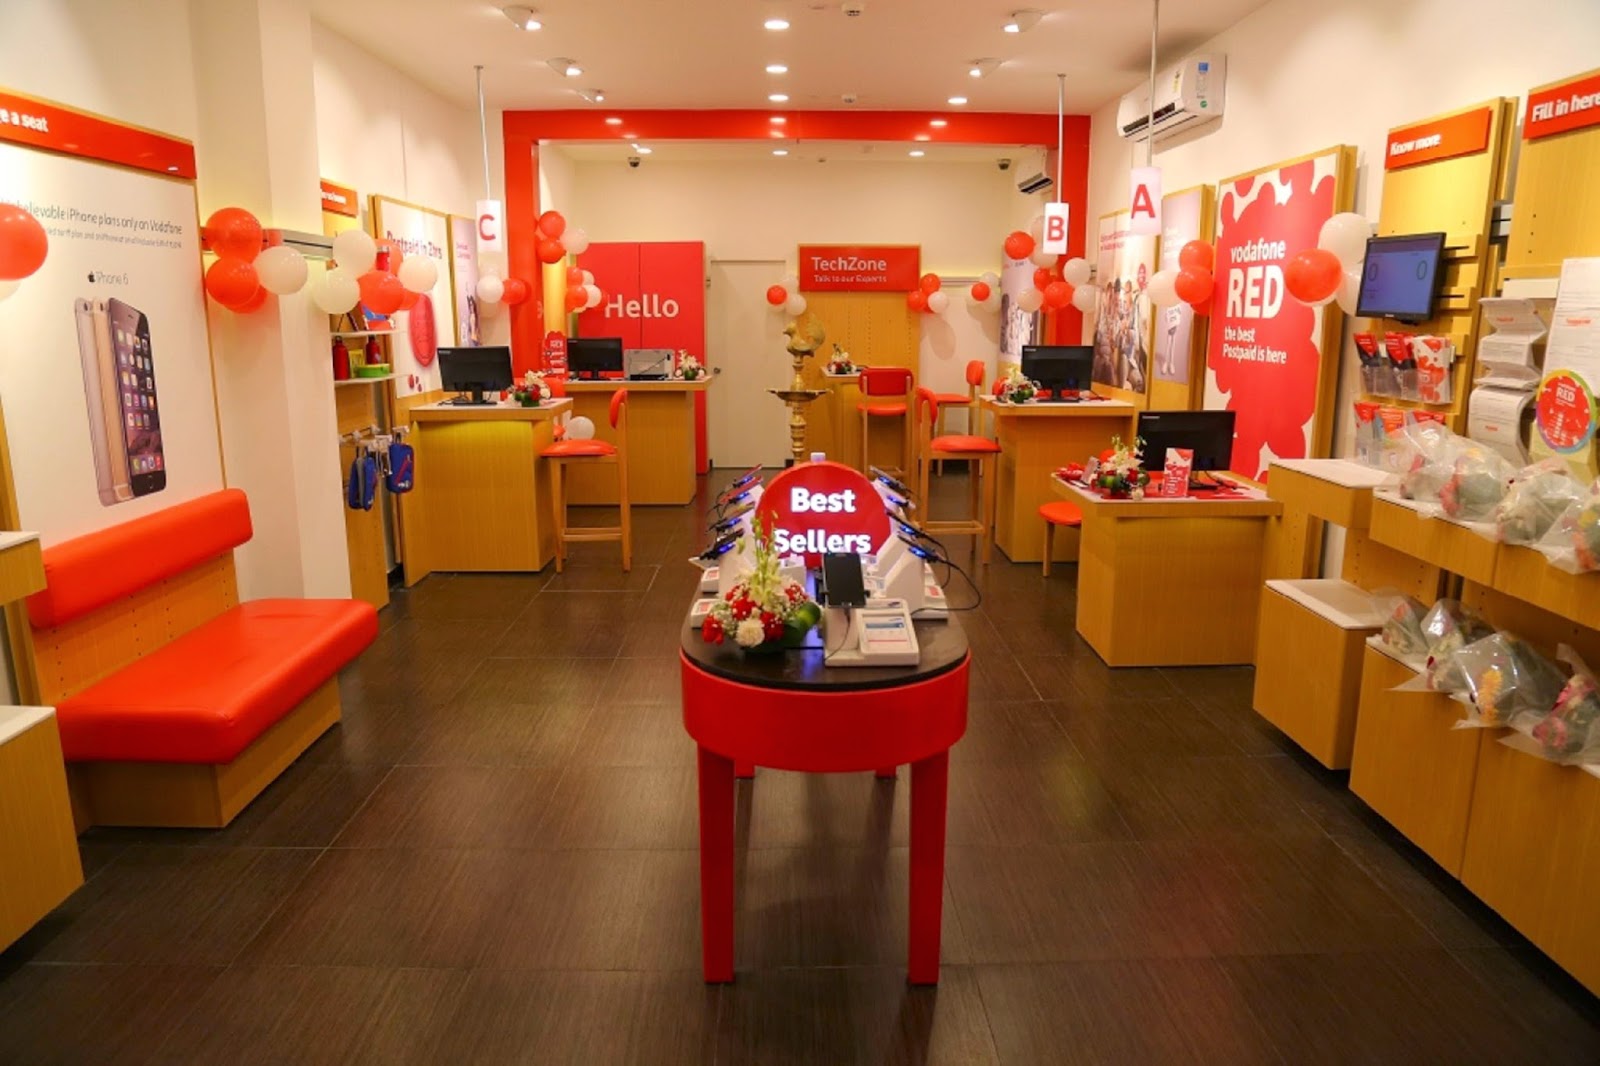 Vodafone Enhances Customer Experience in Bengaluru - Launches Two New Global Design Retail Stores